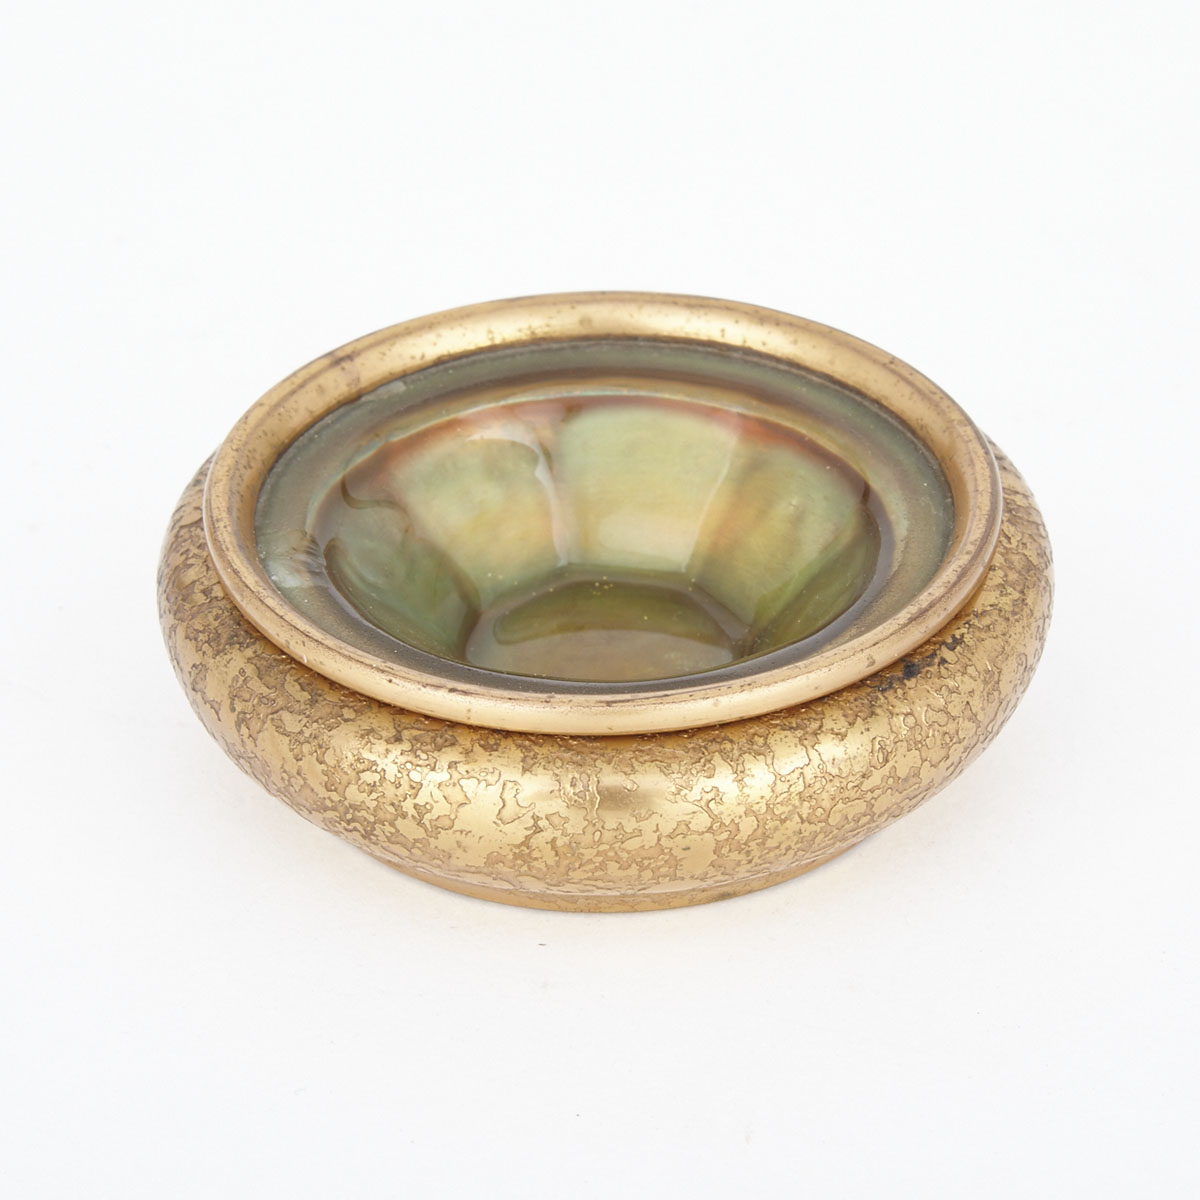 Louis C. Tiffany Furnaces Inc. Gilt Bronze and Favrile Glass Ashtray, early 20th century